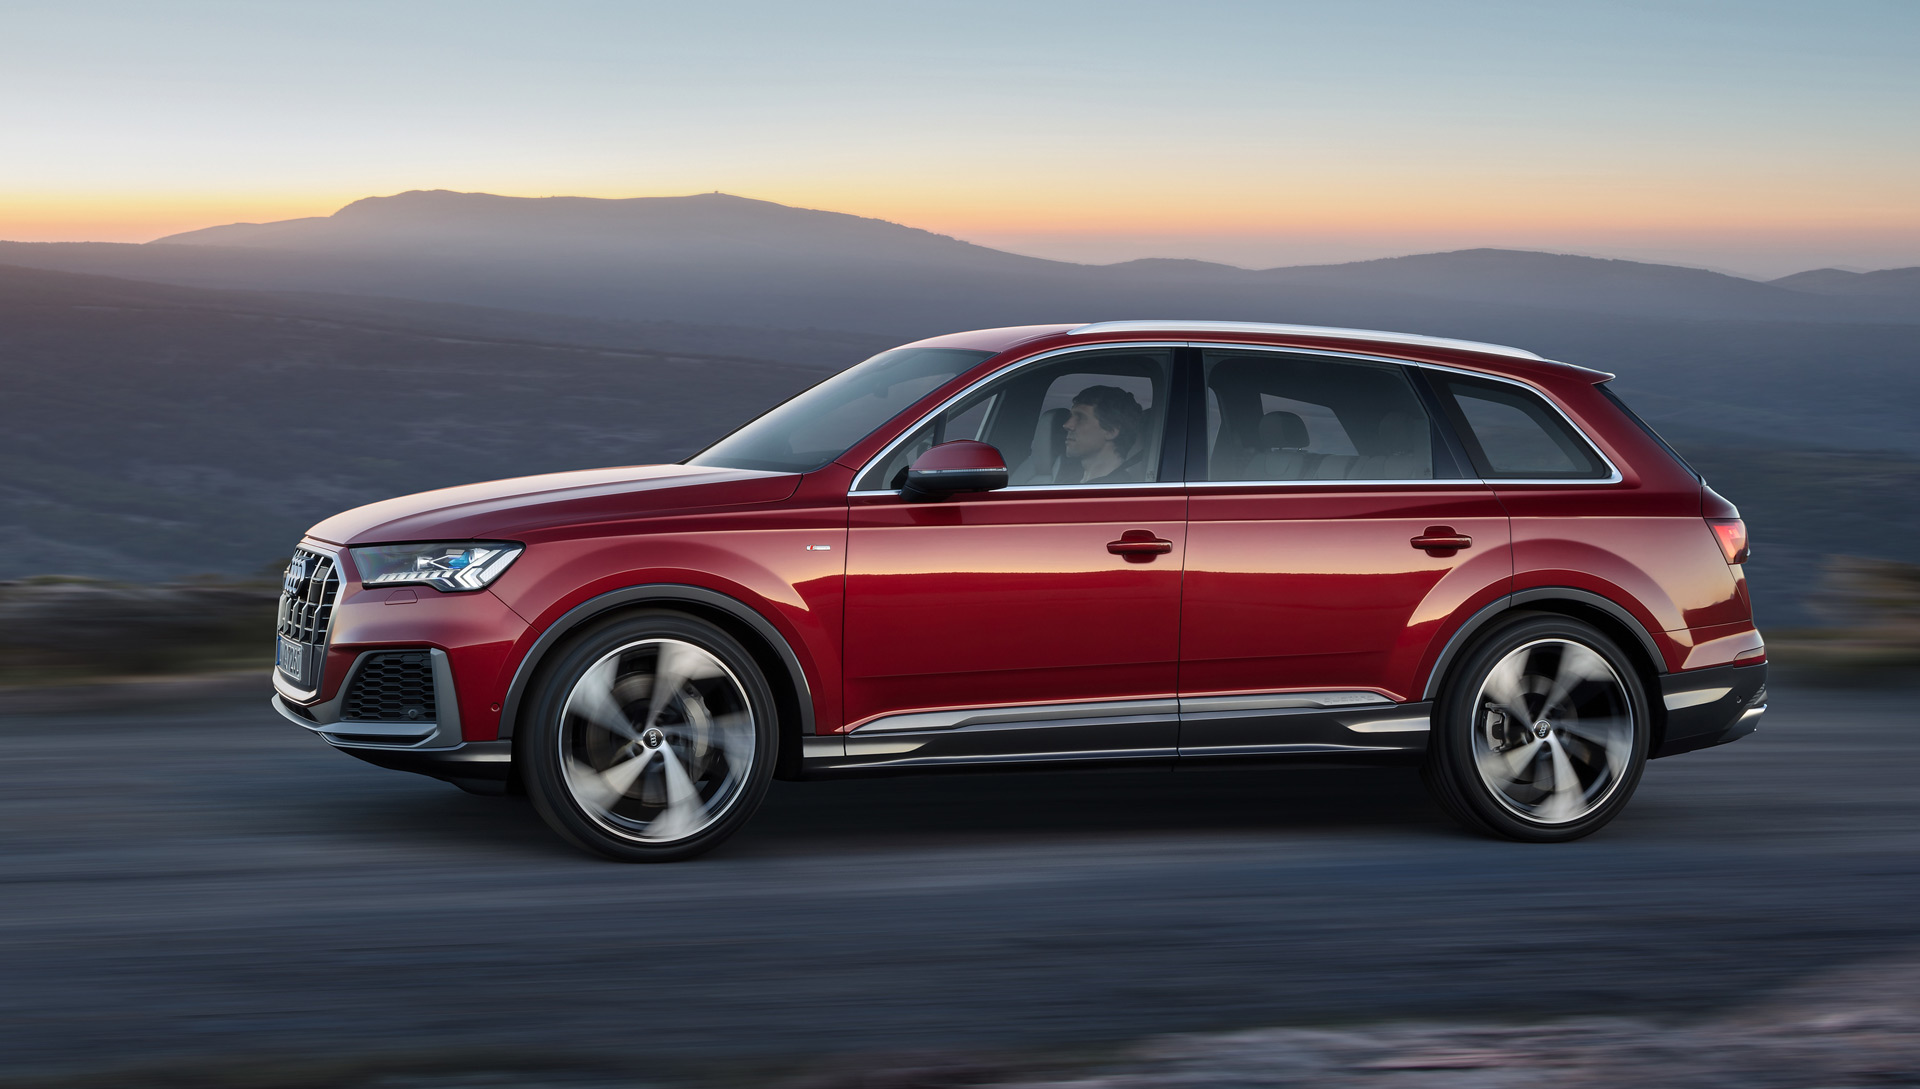 New and Used Audi Q7: Prices, Photos, Reviews, Specs - The Car Connection